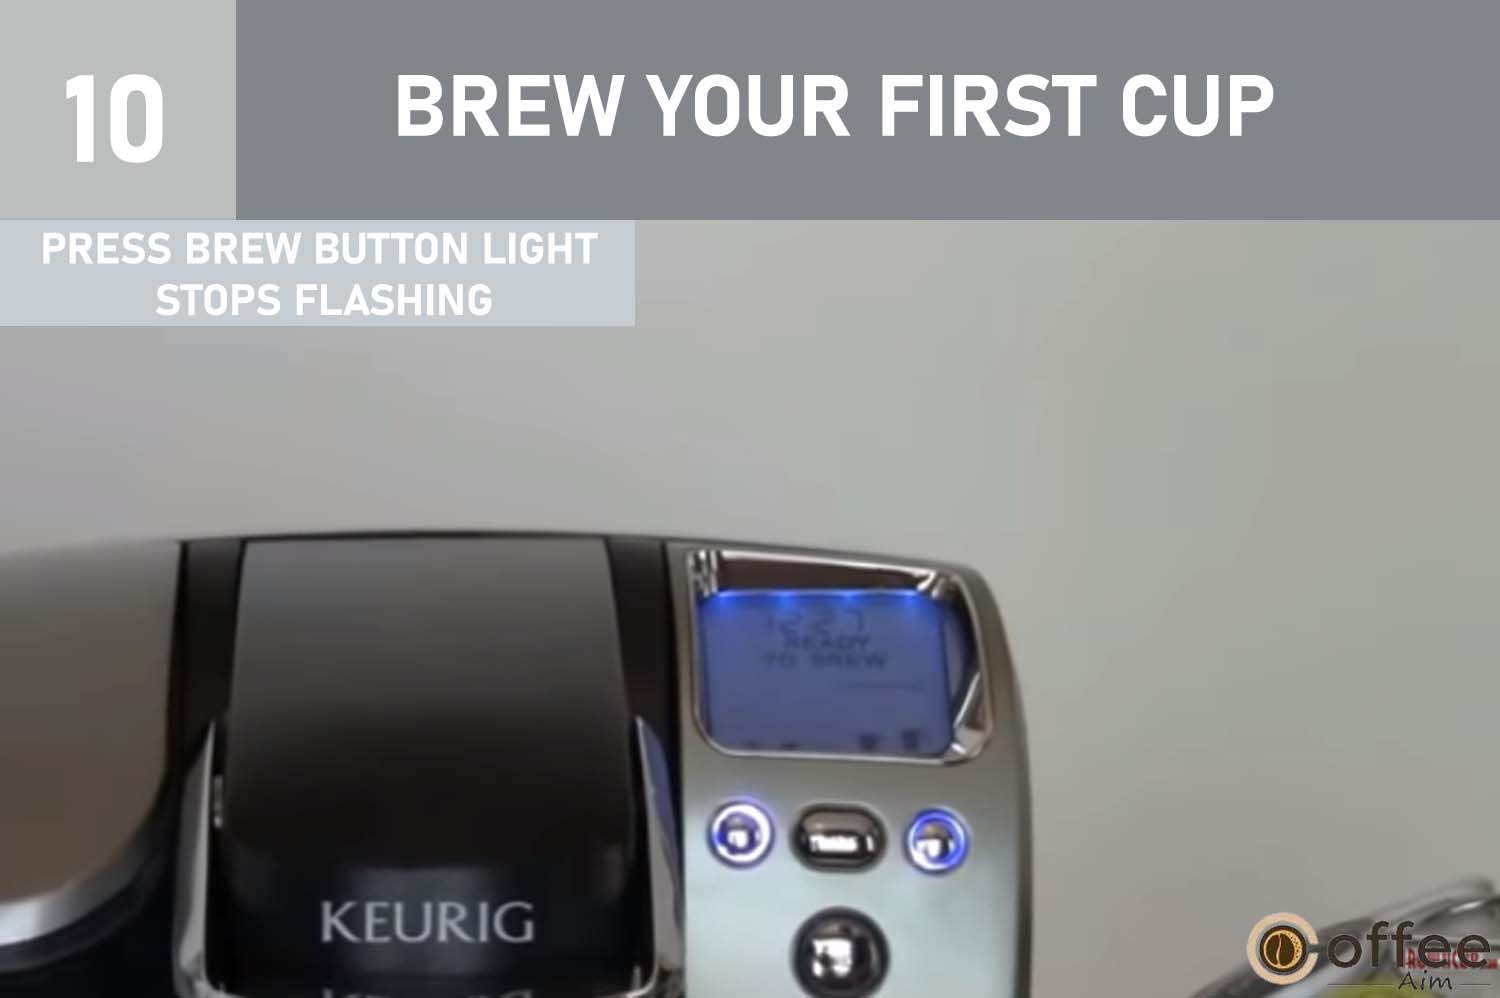 After selecting your desired serving size, press the BREW Button. The flashing light on the BREW Button will stop, and the Left and Right Buttons will no longer be lit, while the icons of the chosen brew size will remain After selecting your desired serving size, press the BREW Button. The flashing light on the BREW Button will stop, and the Left and Right Buttons will no longer be lit, while the icons of the chosen brew size will remain illuminated.